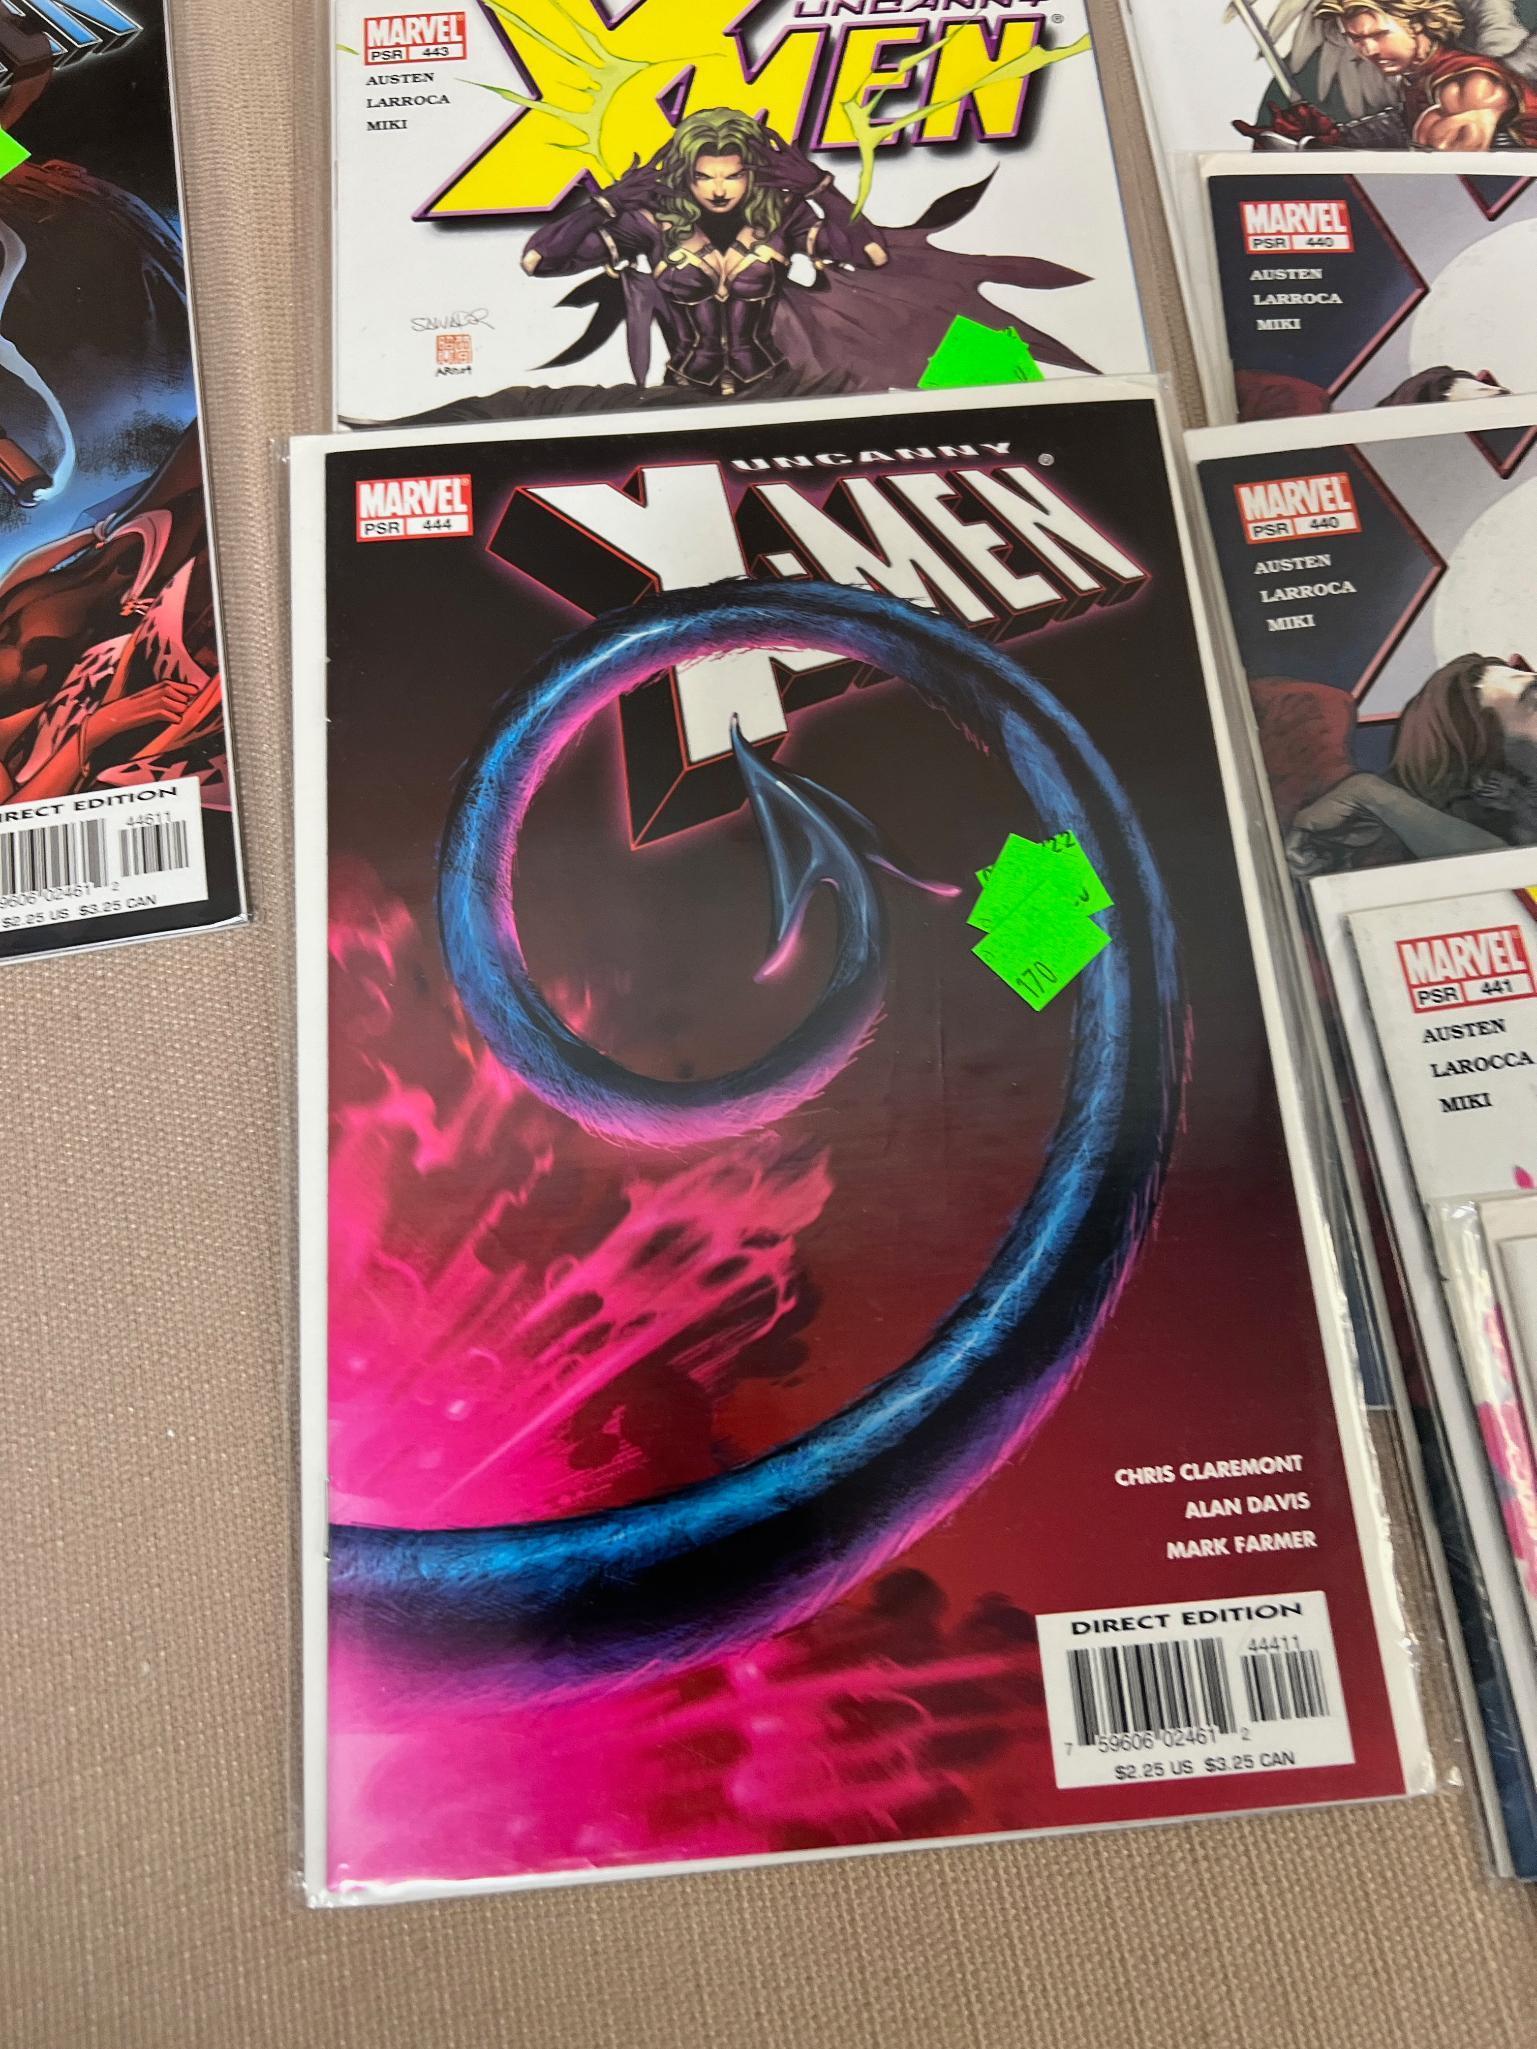 20+ Uncanny X-Men and related Comic Books issues 437-455, some dups, some gaps, see pics